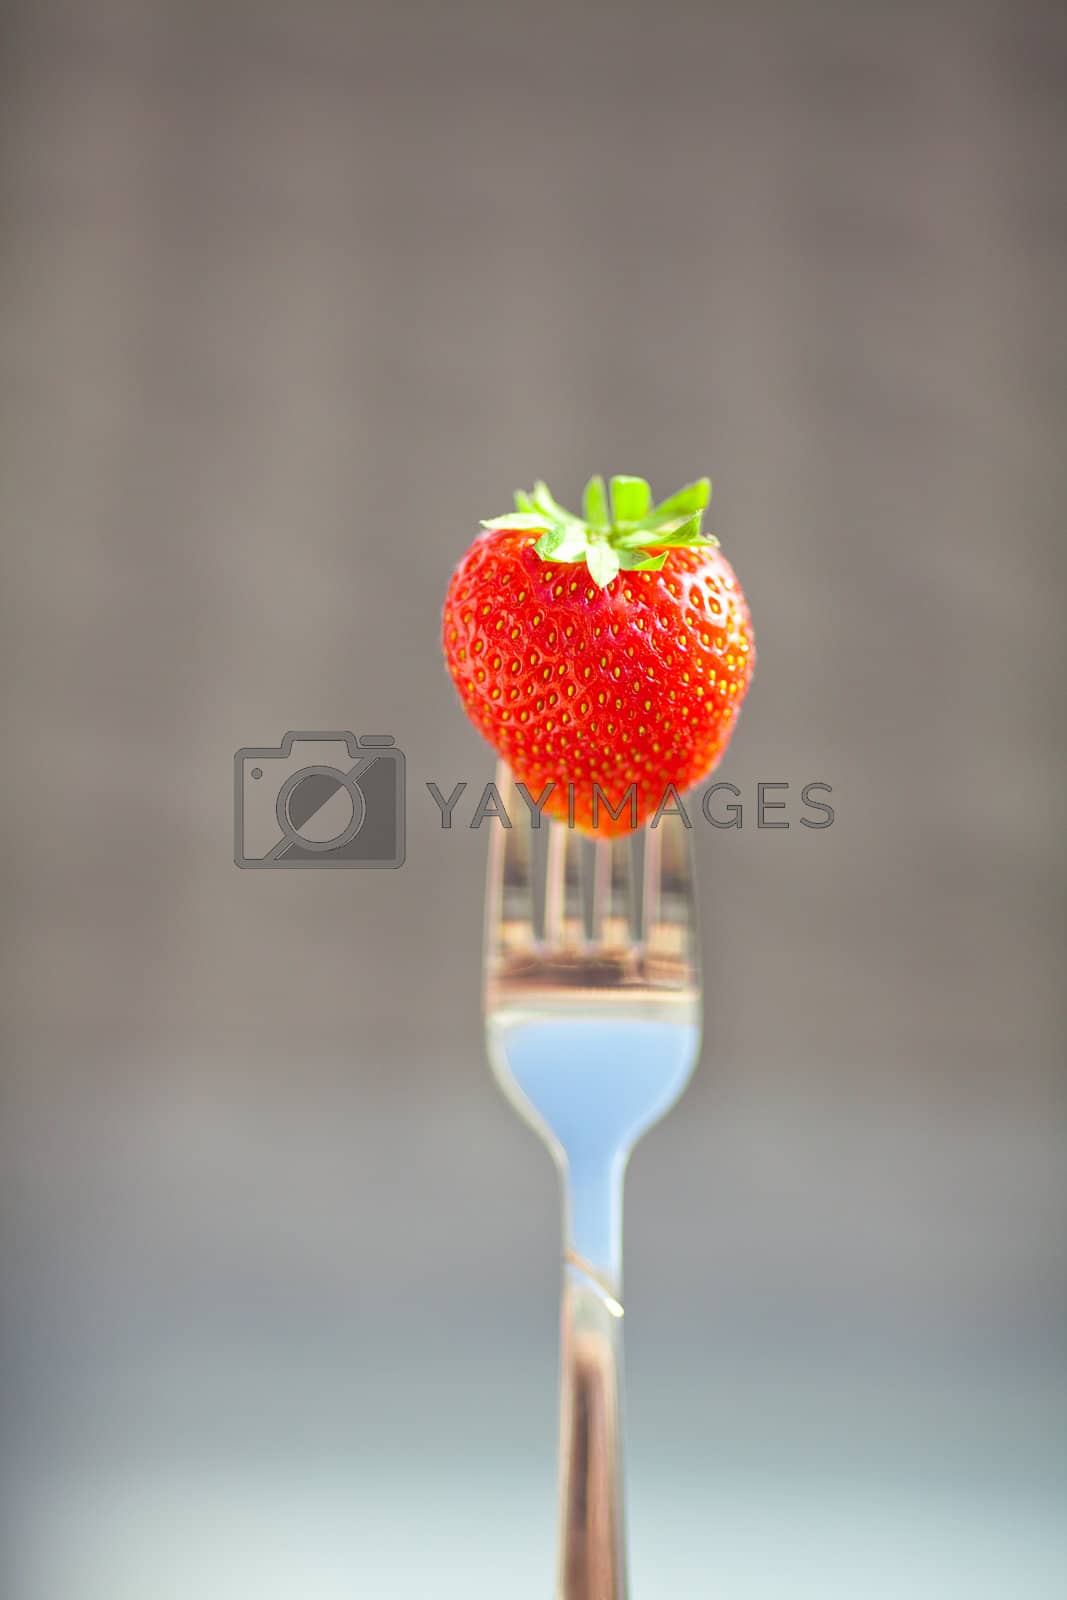 Royalty free image of strawberry on a fork in the daylight by jannyjus